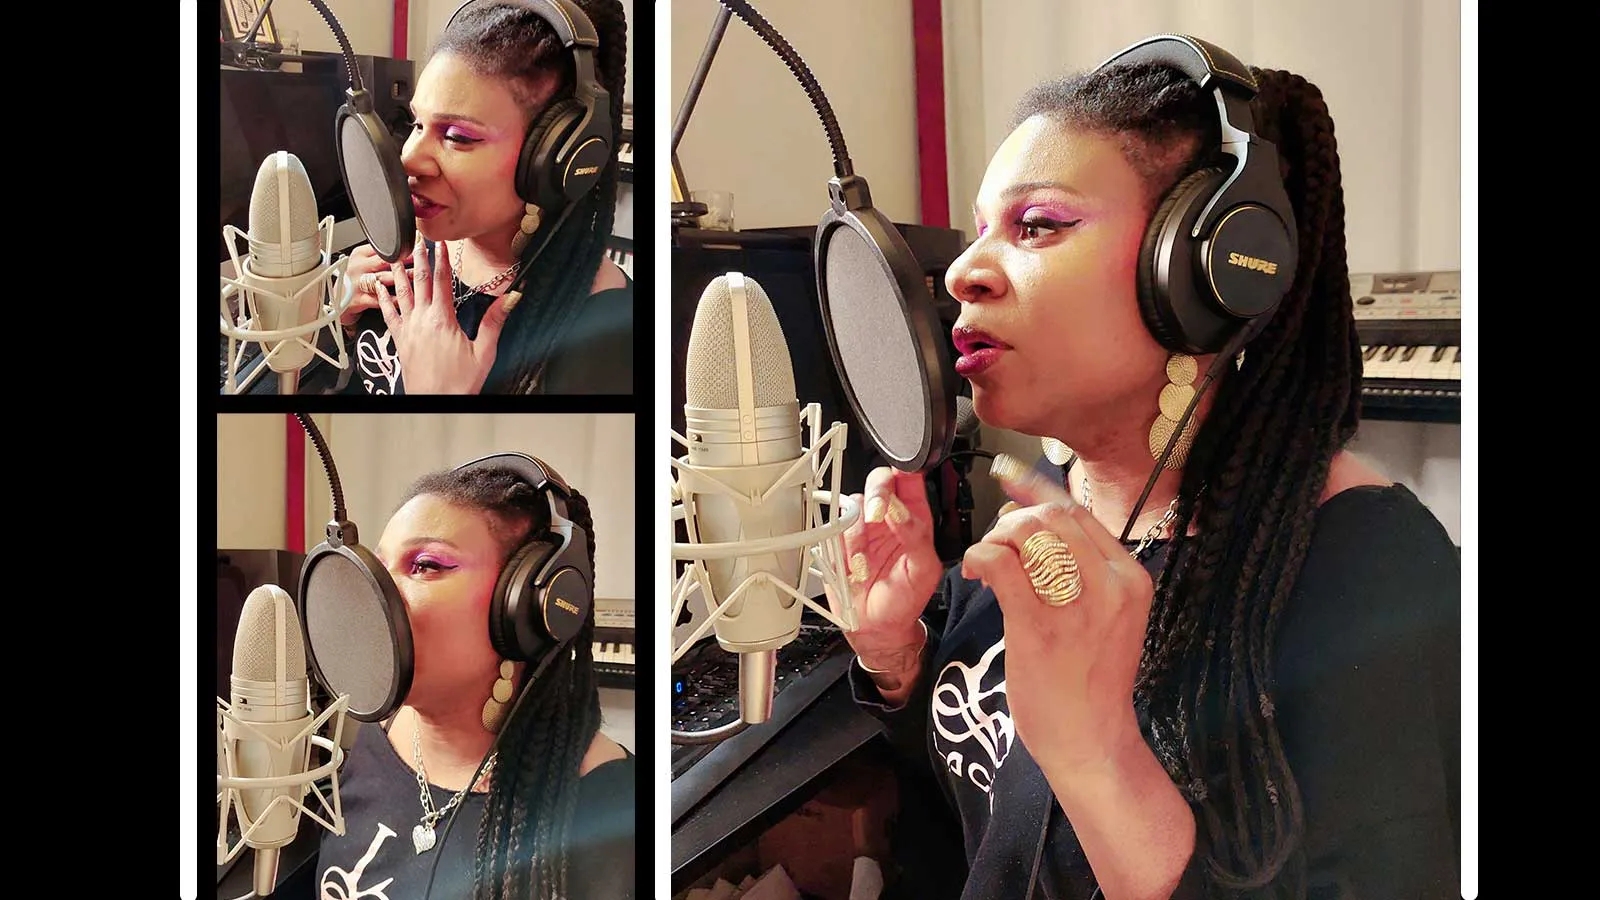 Lachi and the Shure KSM44A - Singing into the microphone in her home studio